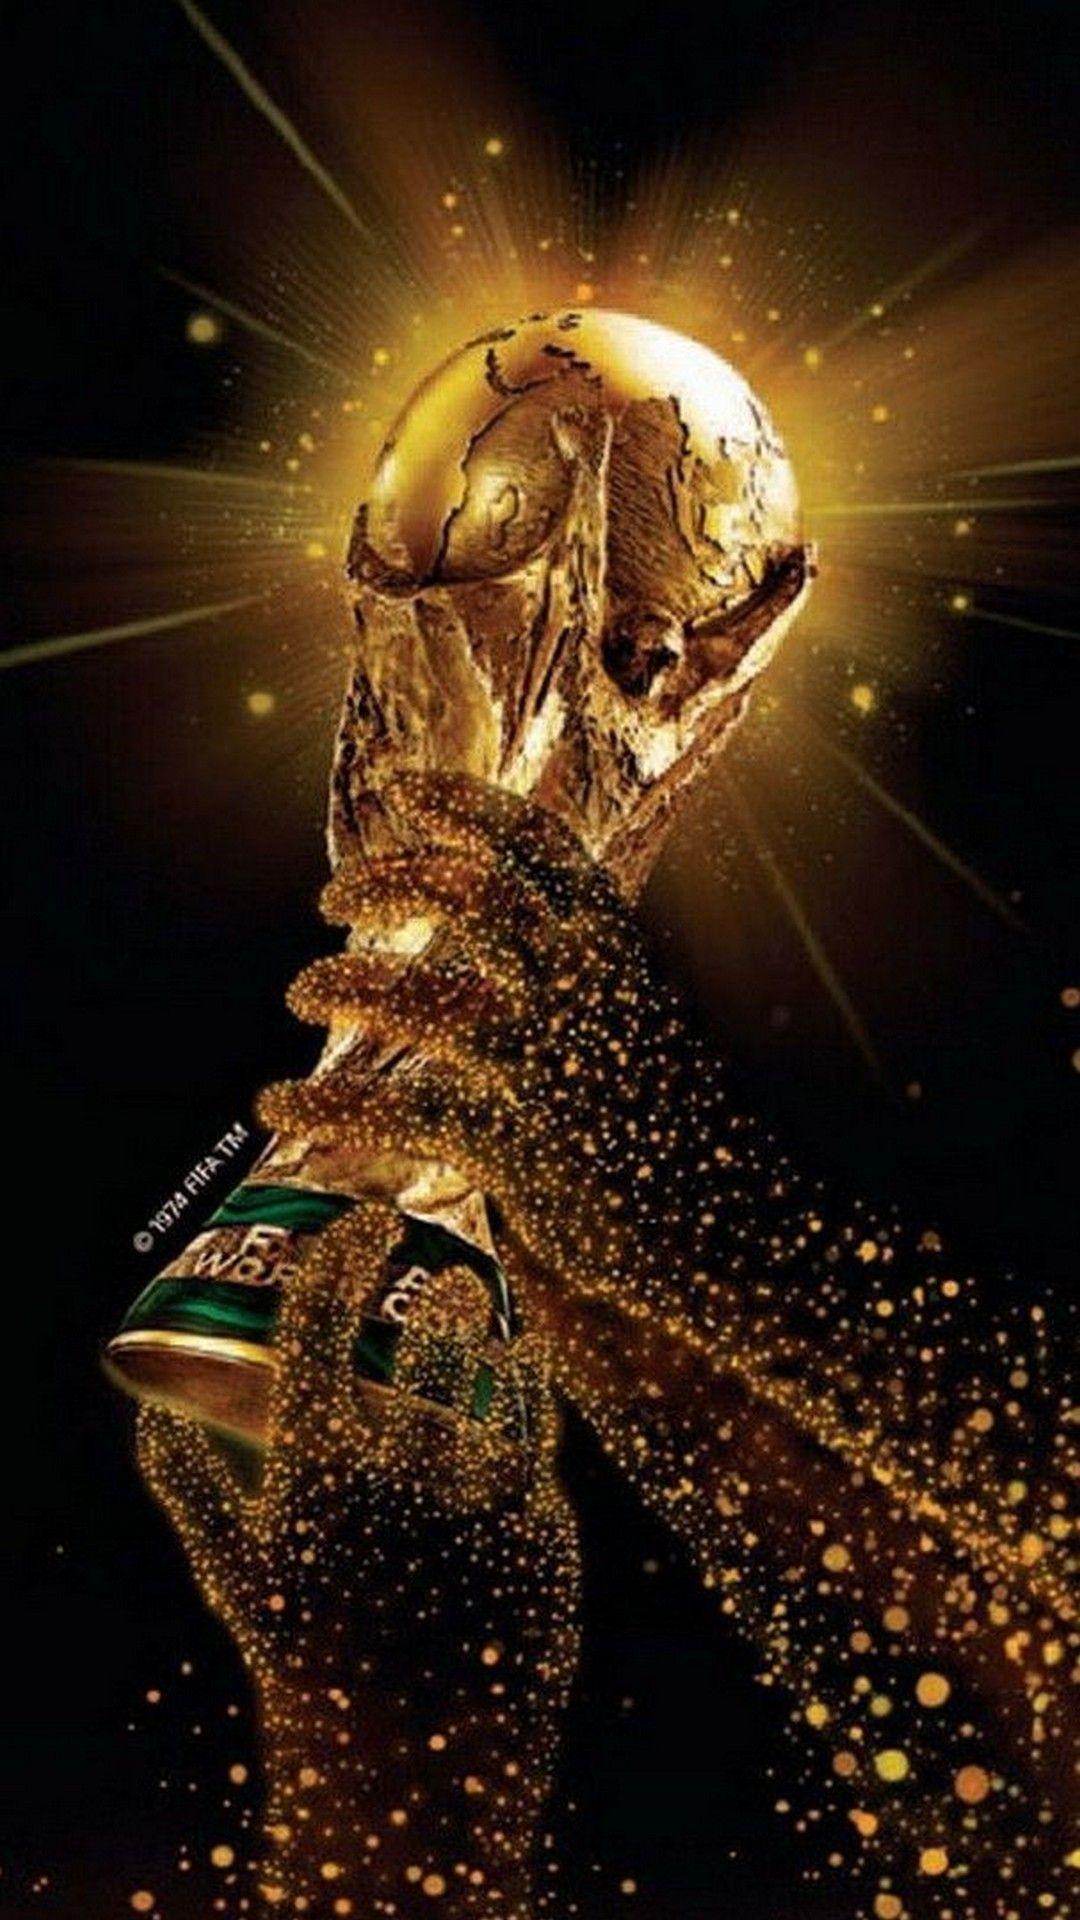 FIFA World Cup Android Wallpaper Android Wallpaper. World cup trophy, World cup, Fifa world cup